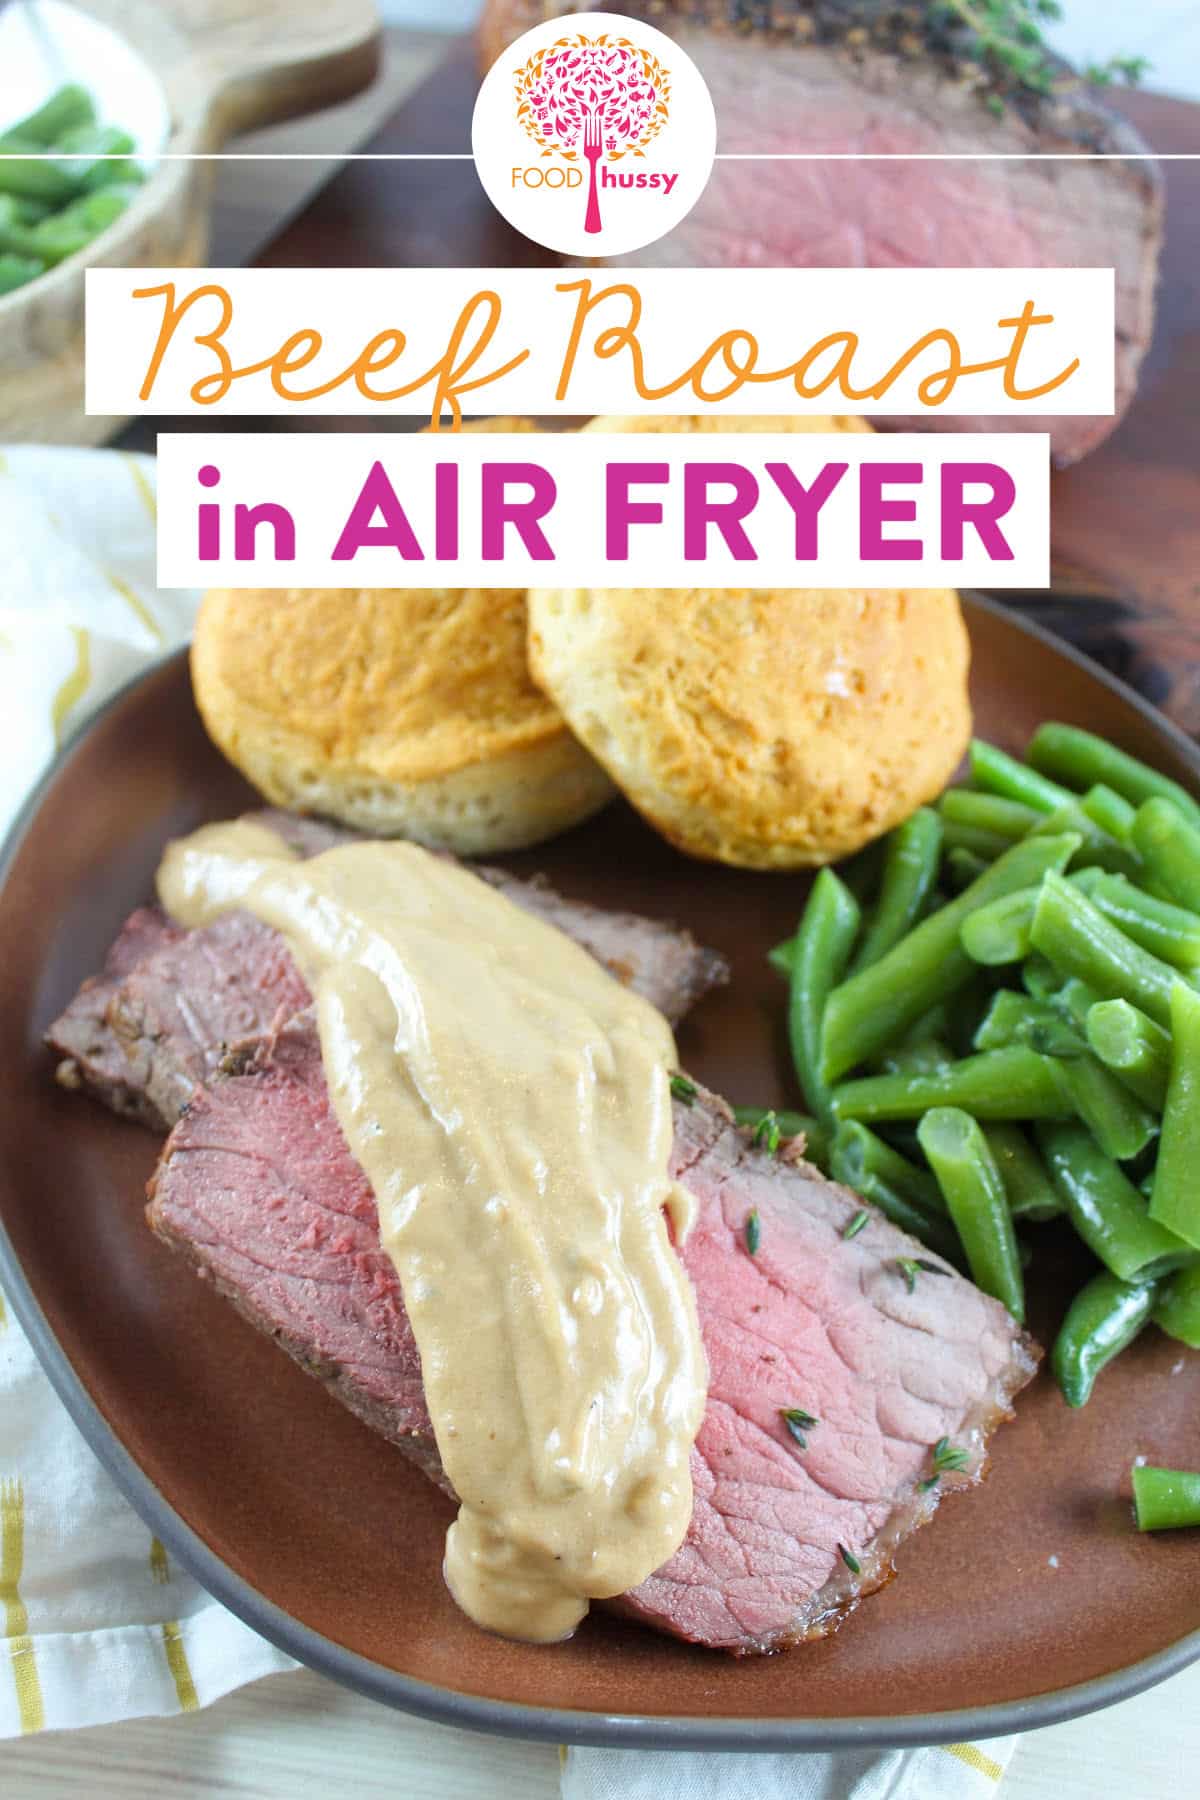 Making a Beef Roast in the Air Fryer will take far less time than in the oven or slow cooker and give you delicious, thin slices of roast beef! The outside has a delicious herbed crust while the inside is a perfect, tender medium rare! via @foodhussy